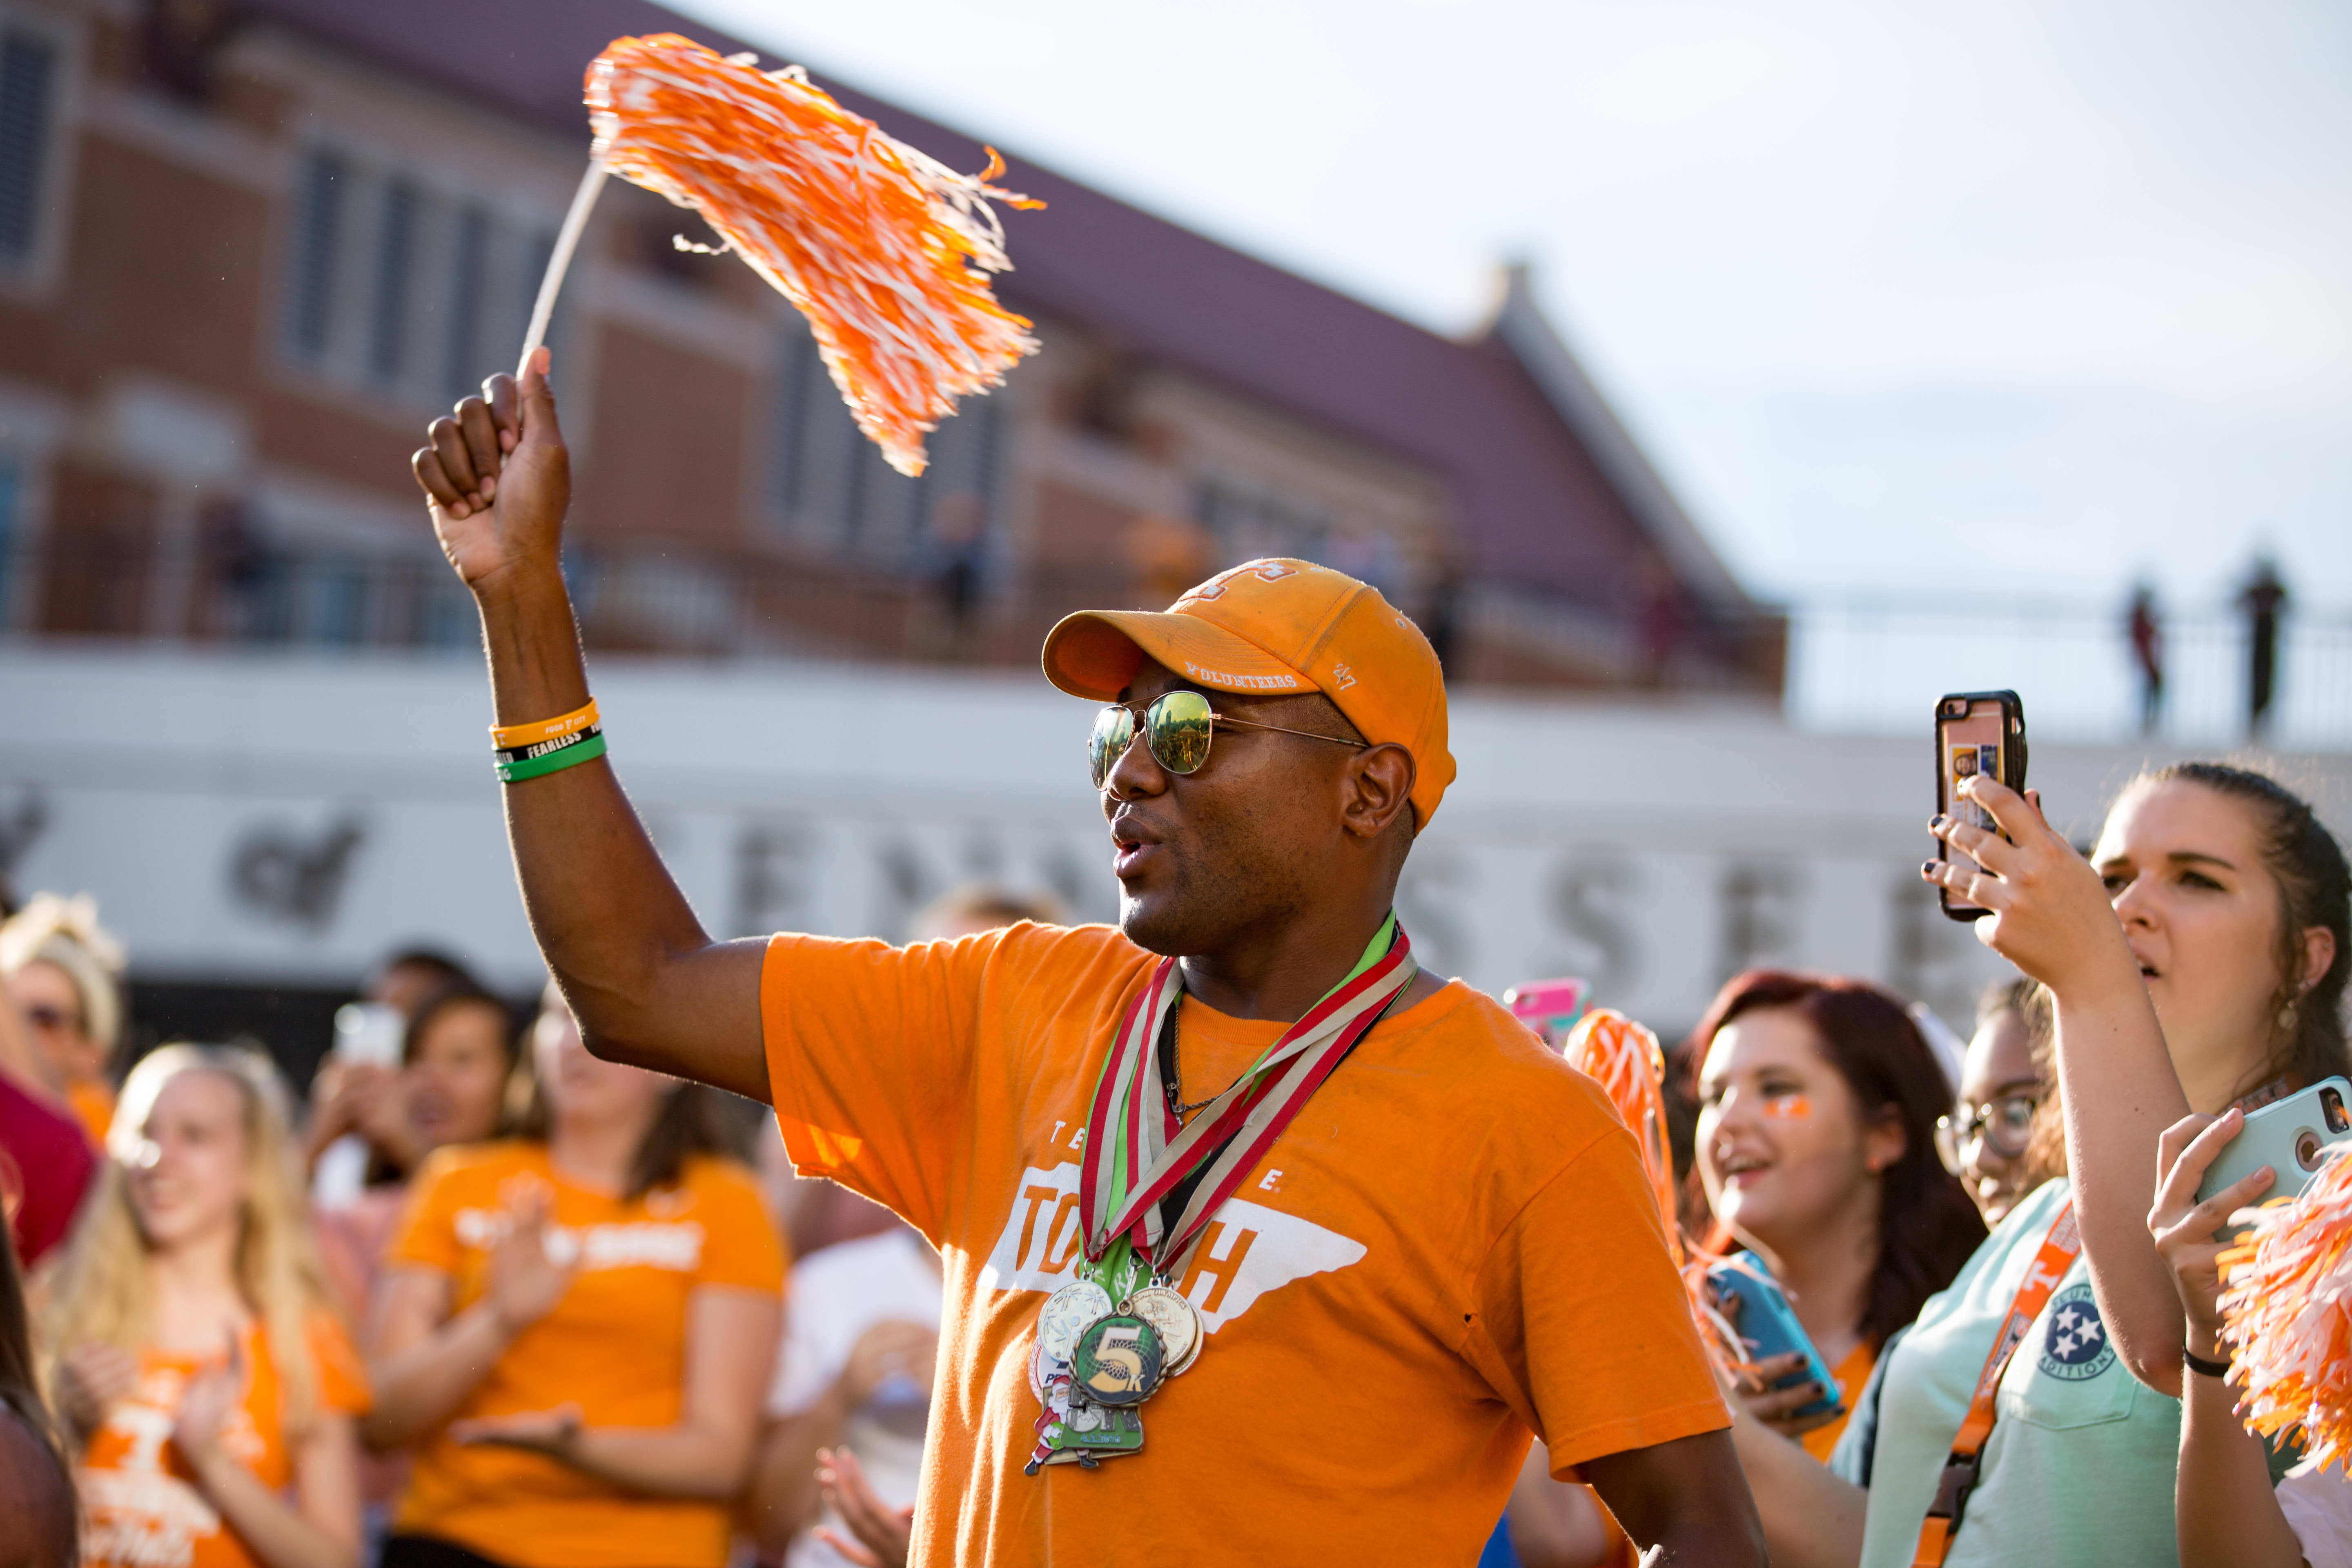 A male dressed in orange waves his pom during the pep rally before the first football game of the season.